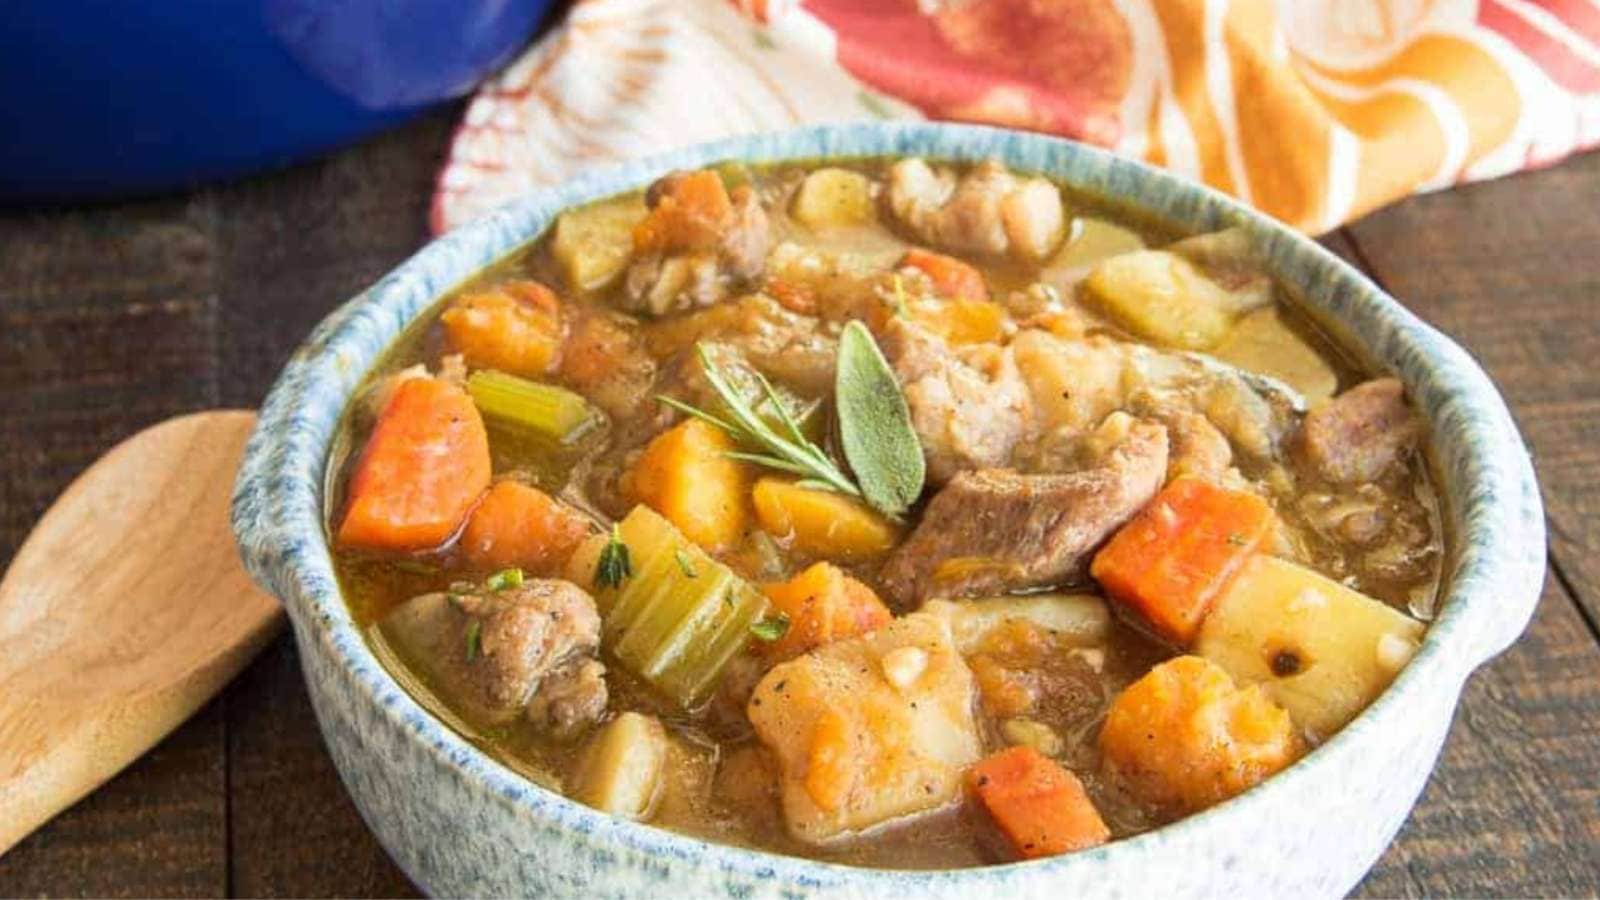 A bowl of pork stew with potatoes and squash cubes.